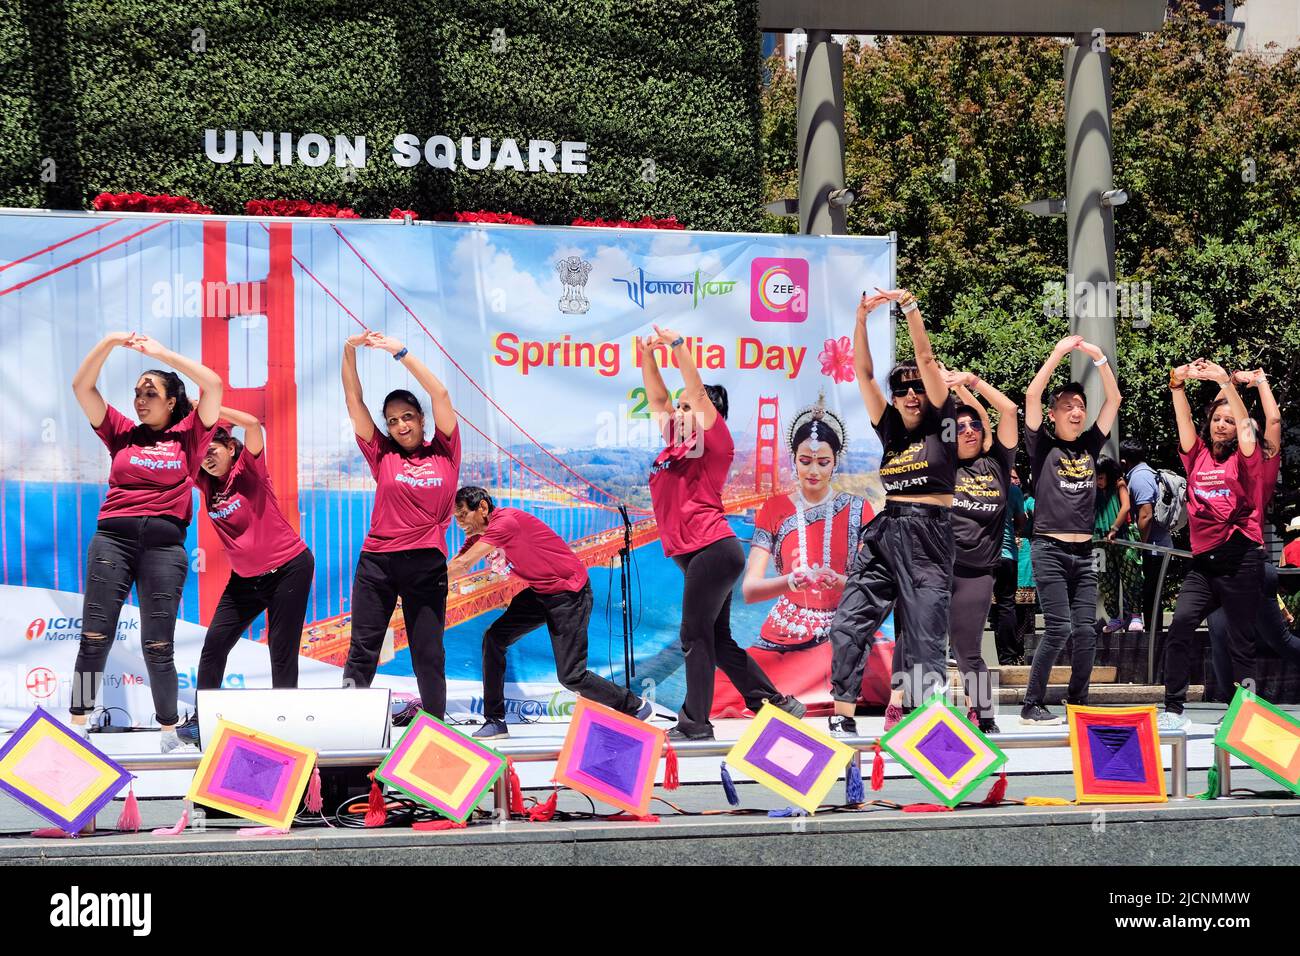 Performers at Spring India Day 2022 at Union Square in downtown San Francisco, California; celebrating Indian culture in the Bay Area. Stock Photo